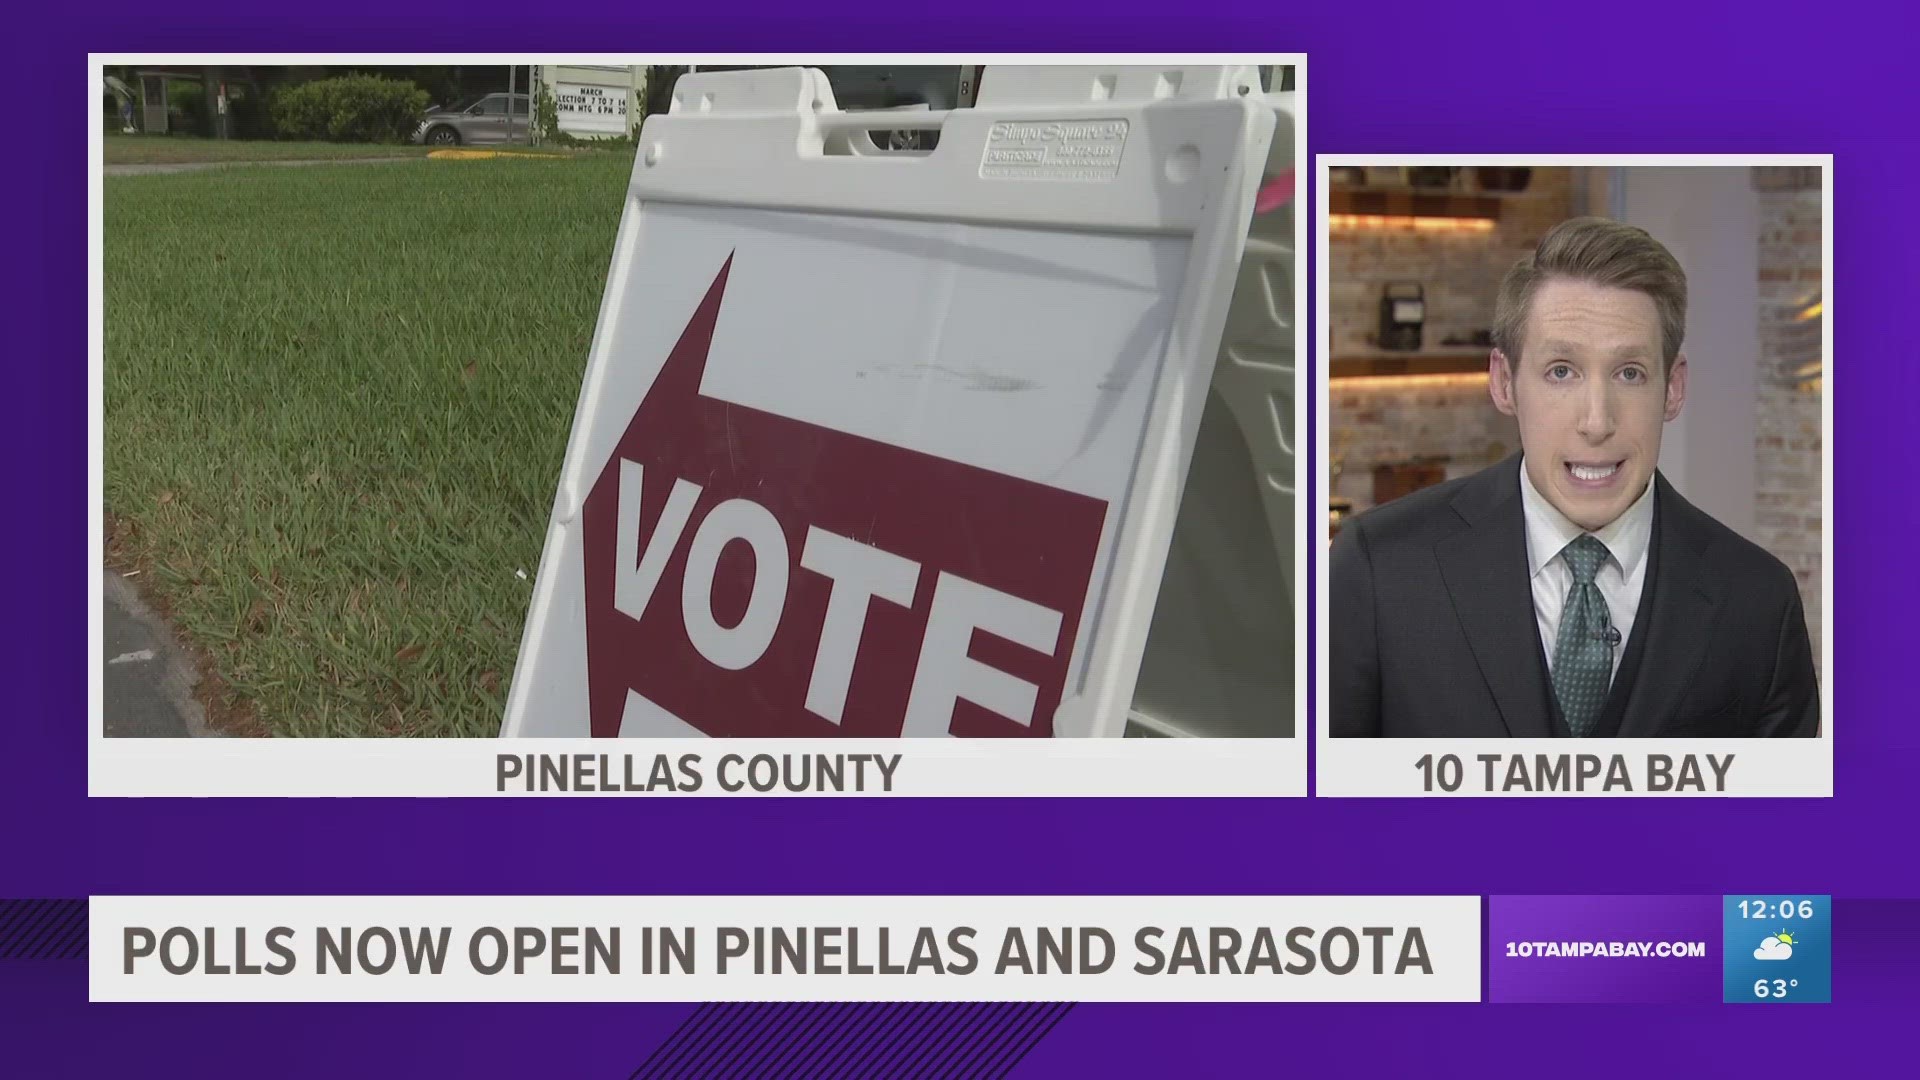 People in 11 Pinellas County cities can cast their votes until 7 p.m.